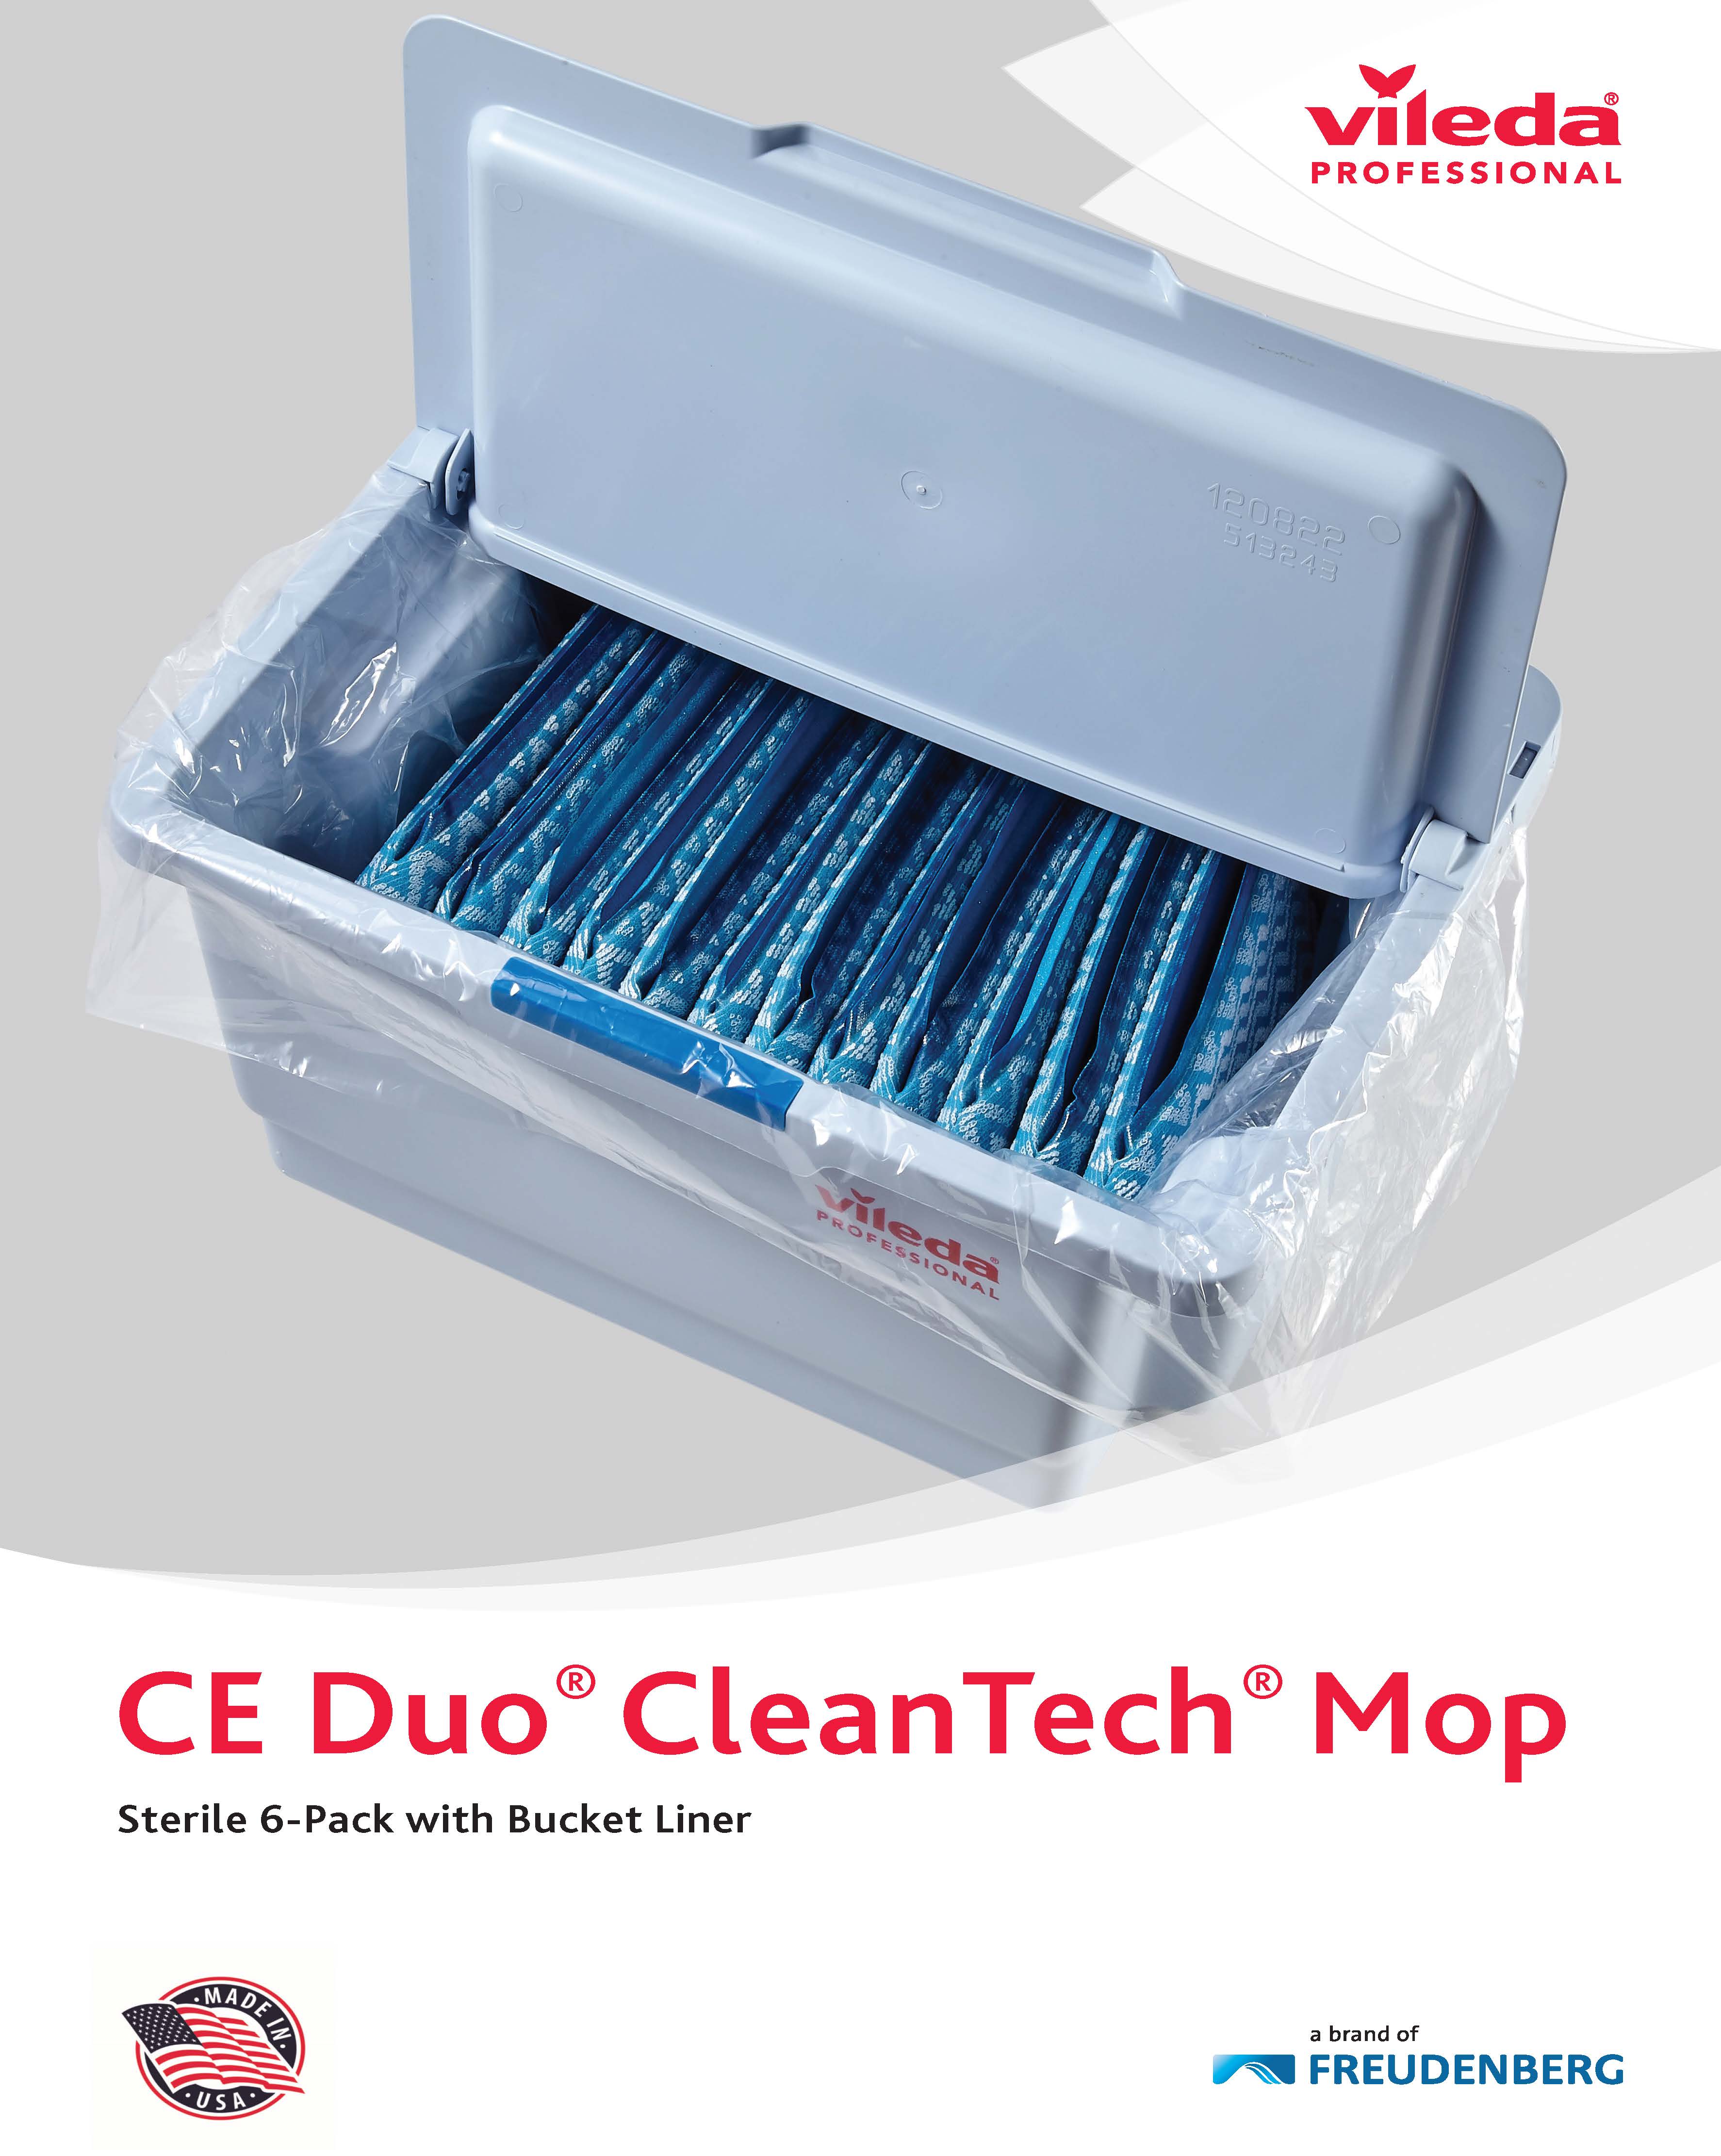 CE Duo 6 Pack Brochure_USA_Page_1.jpg